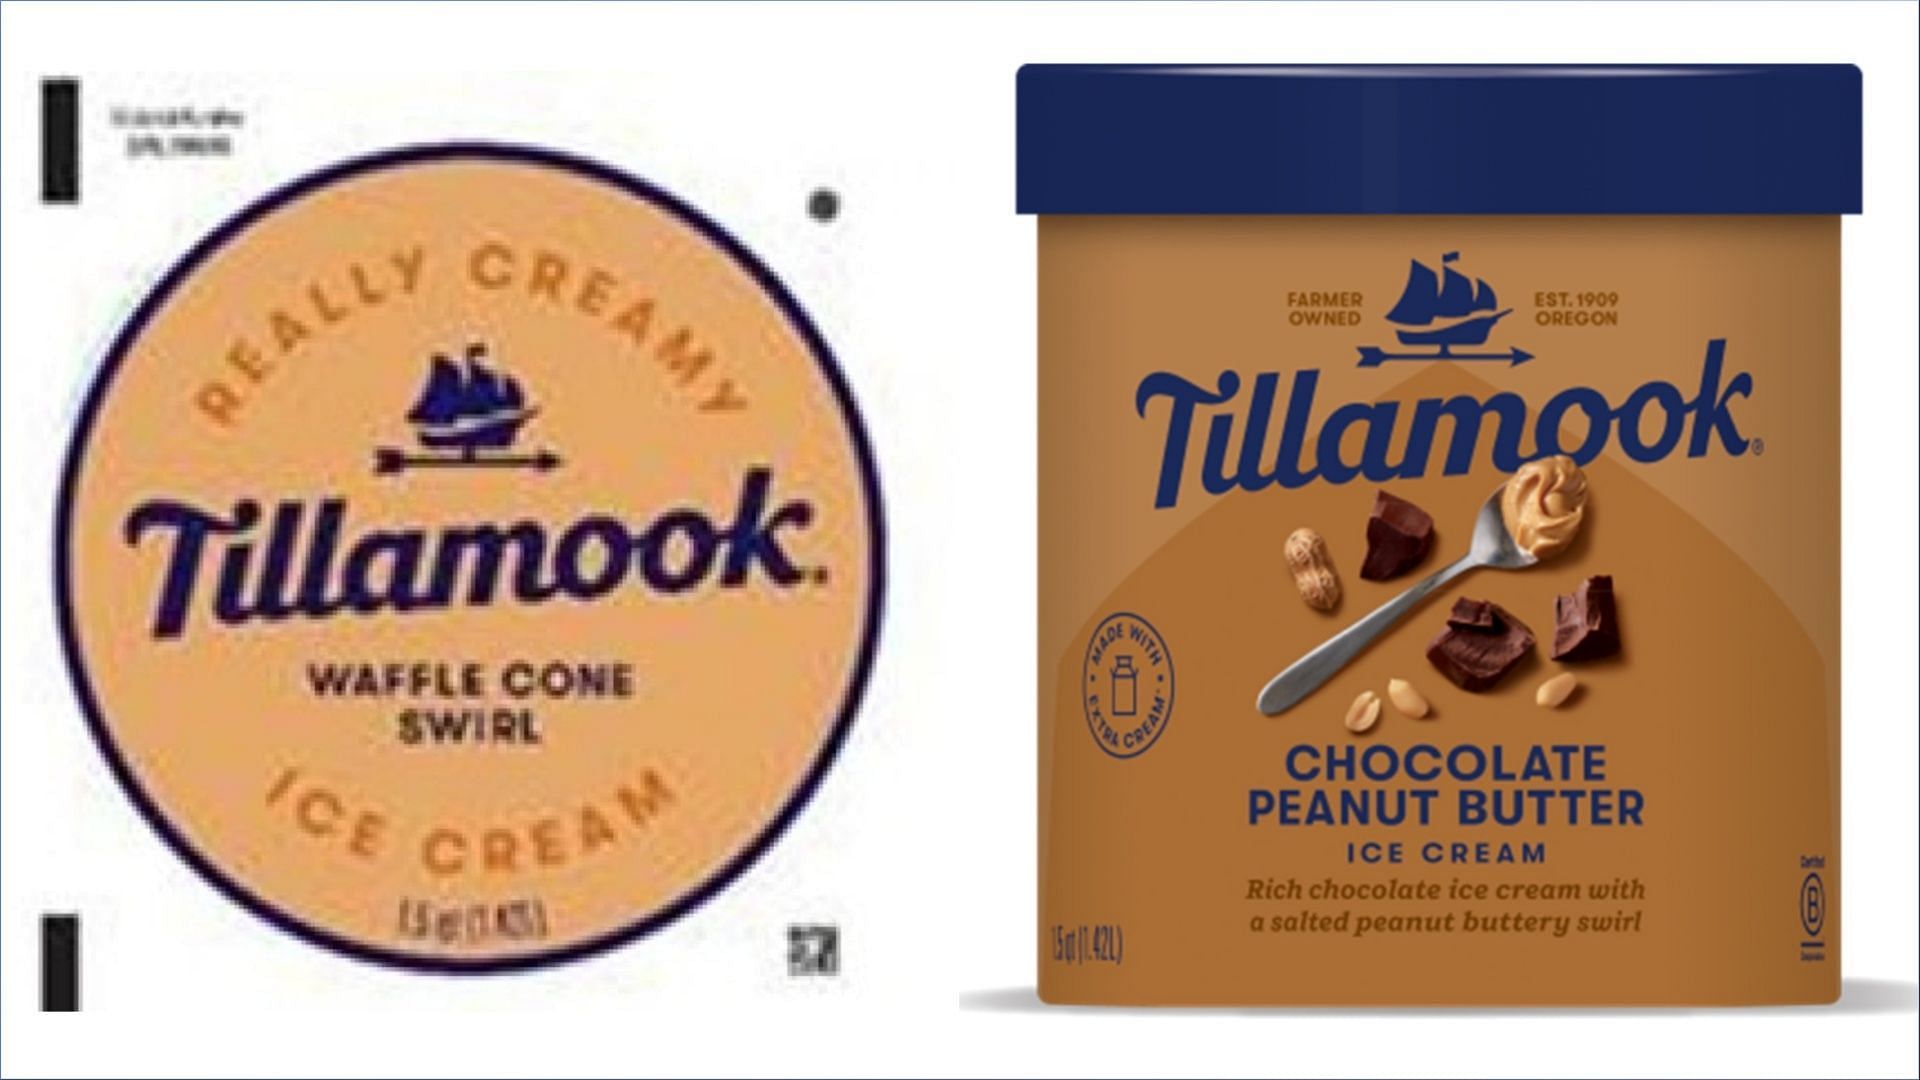 The recalled Tillamook Waffle Cone Swirl ice cream may contain undeclared wheat and soy allergens (Image via Food and Drug Administration)